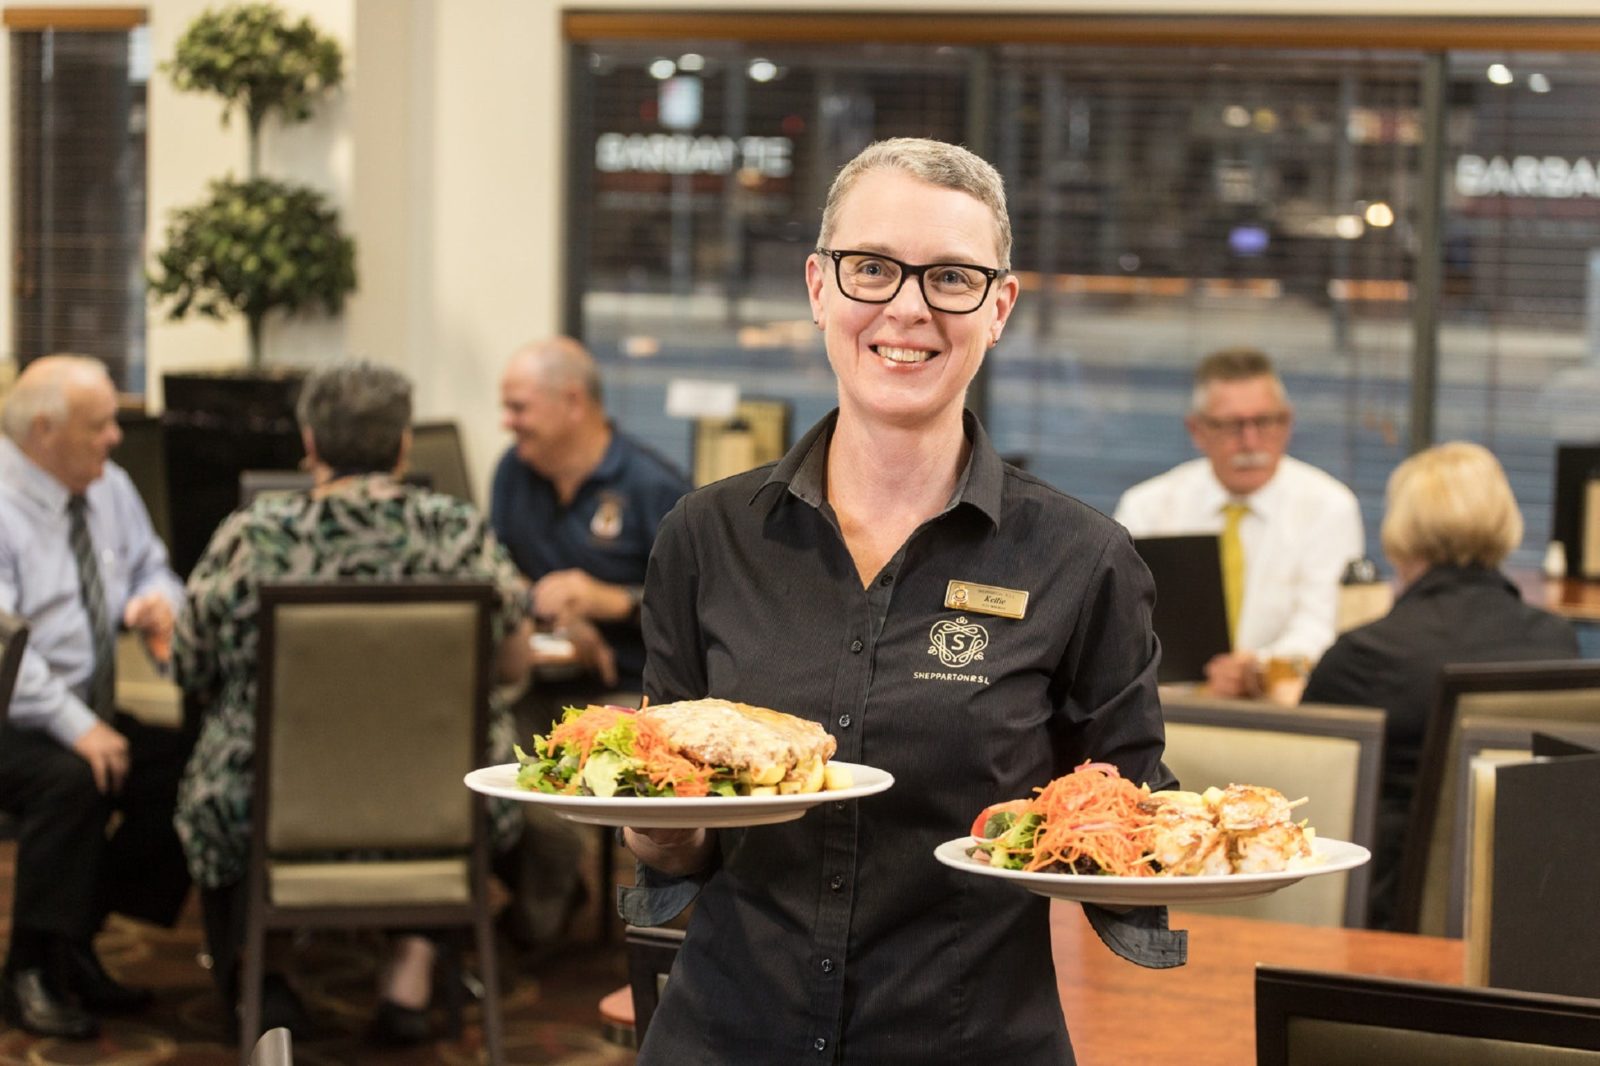 Digger's Bistro is a favourite with locals and open for lunch and dinner daily